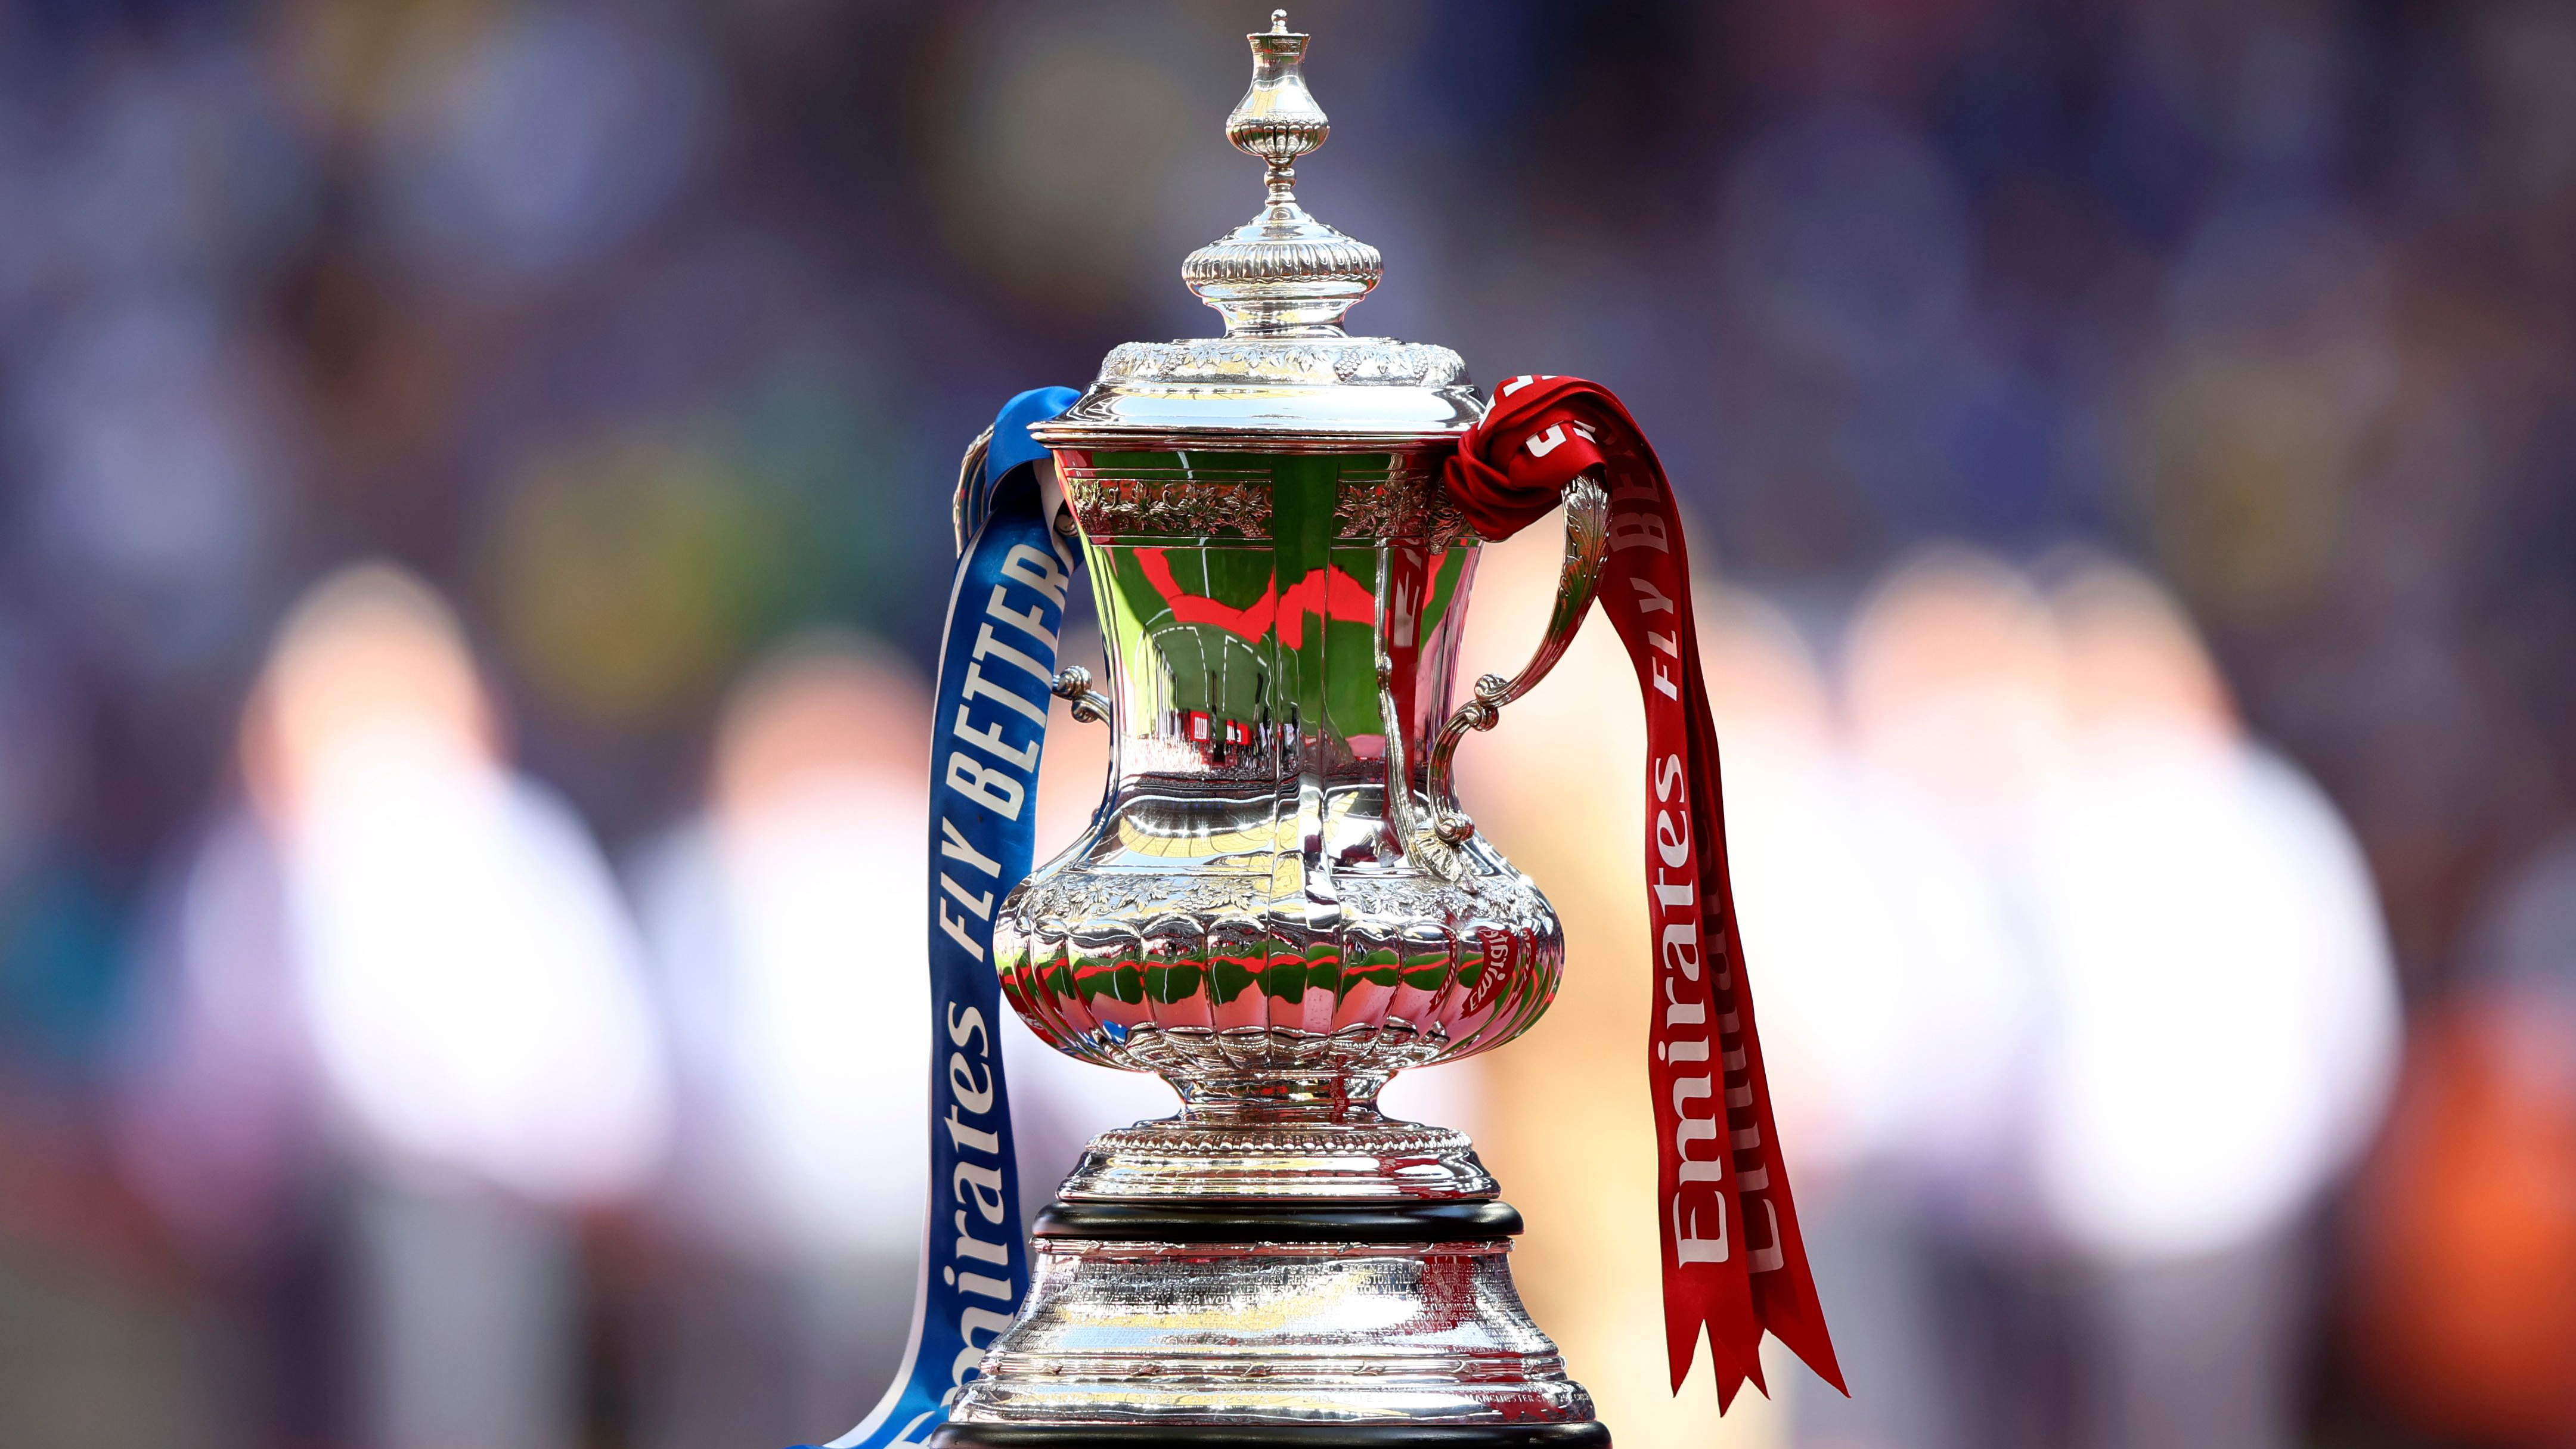 Image of the FA Cup with blue and red ribbons